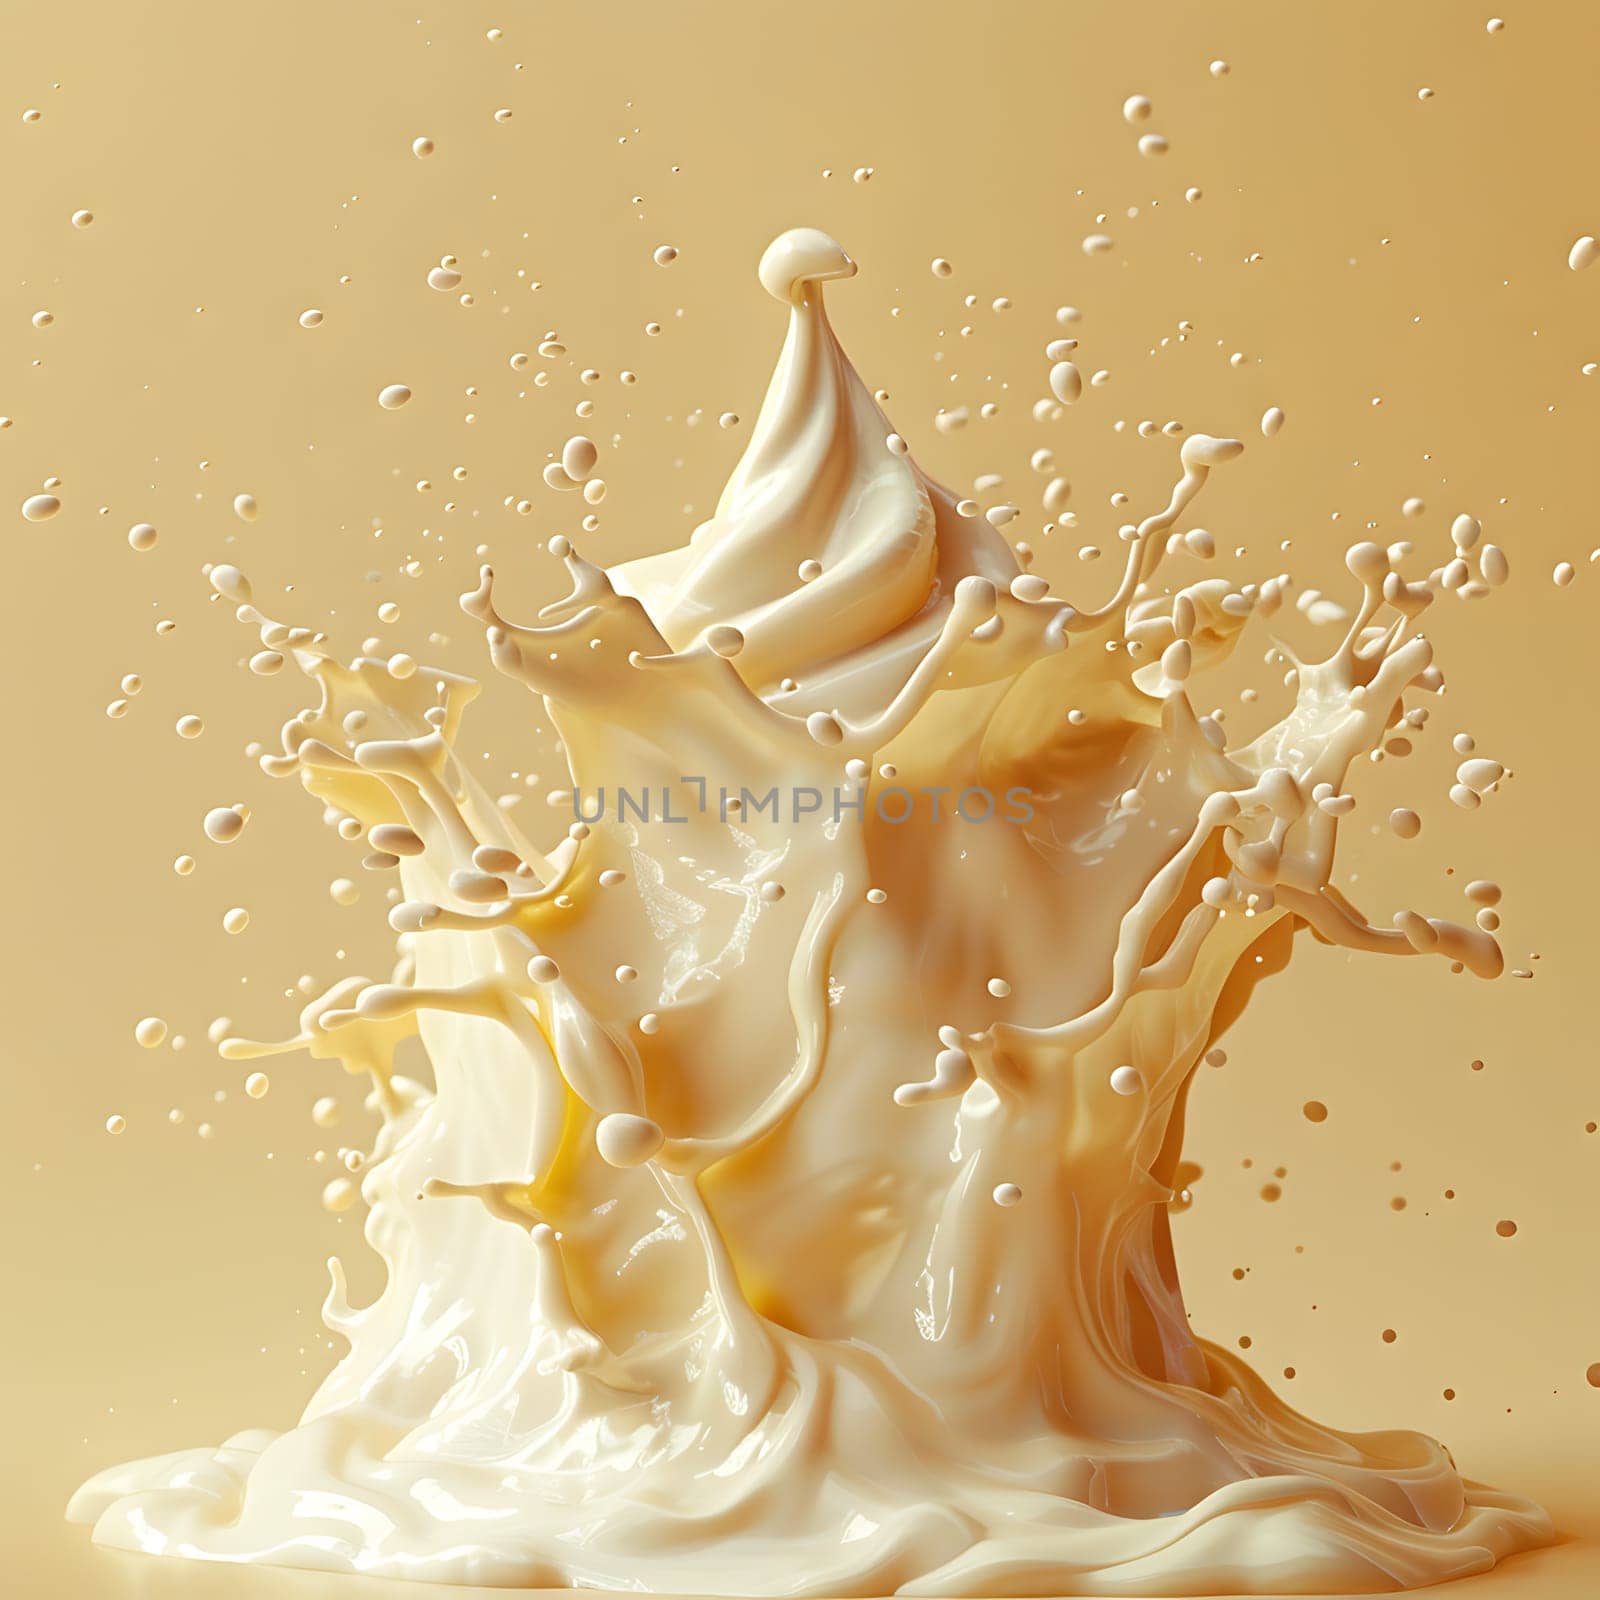 a splash of white liquid on a yellow background by Nadtochiy